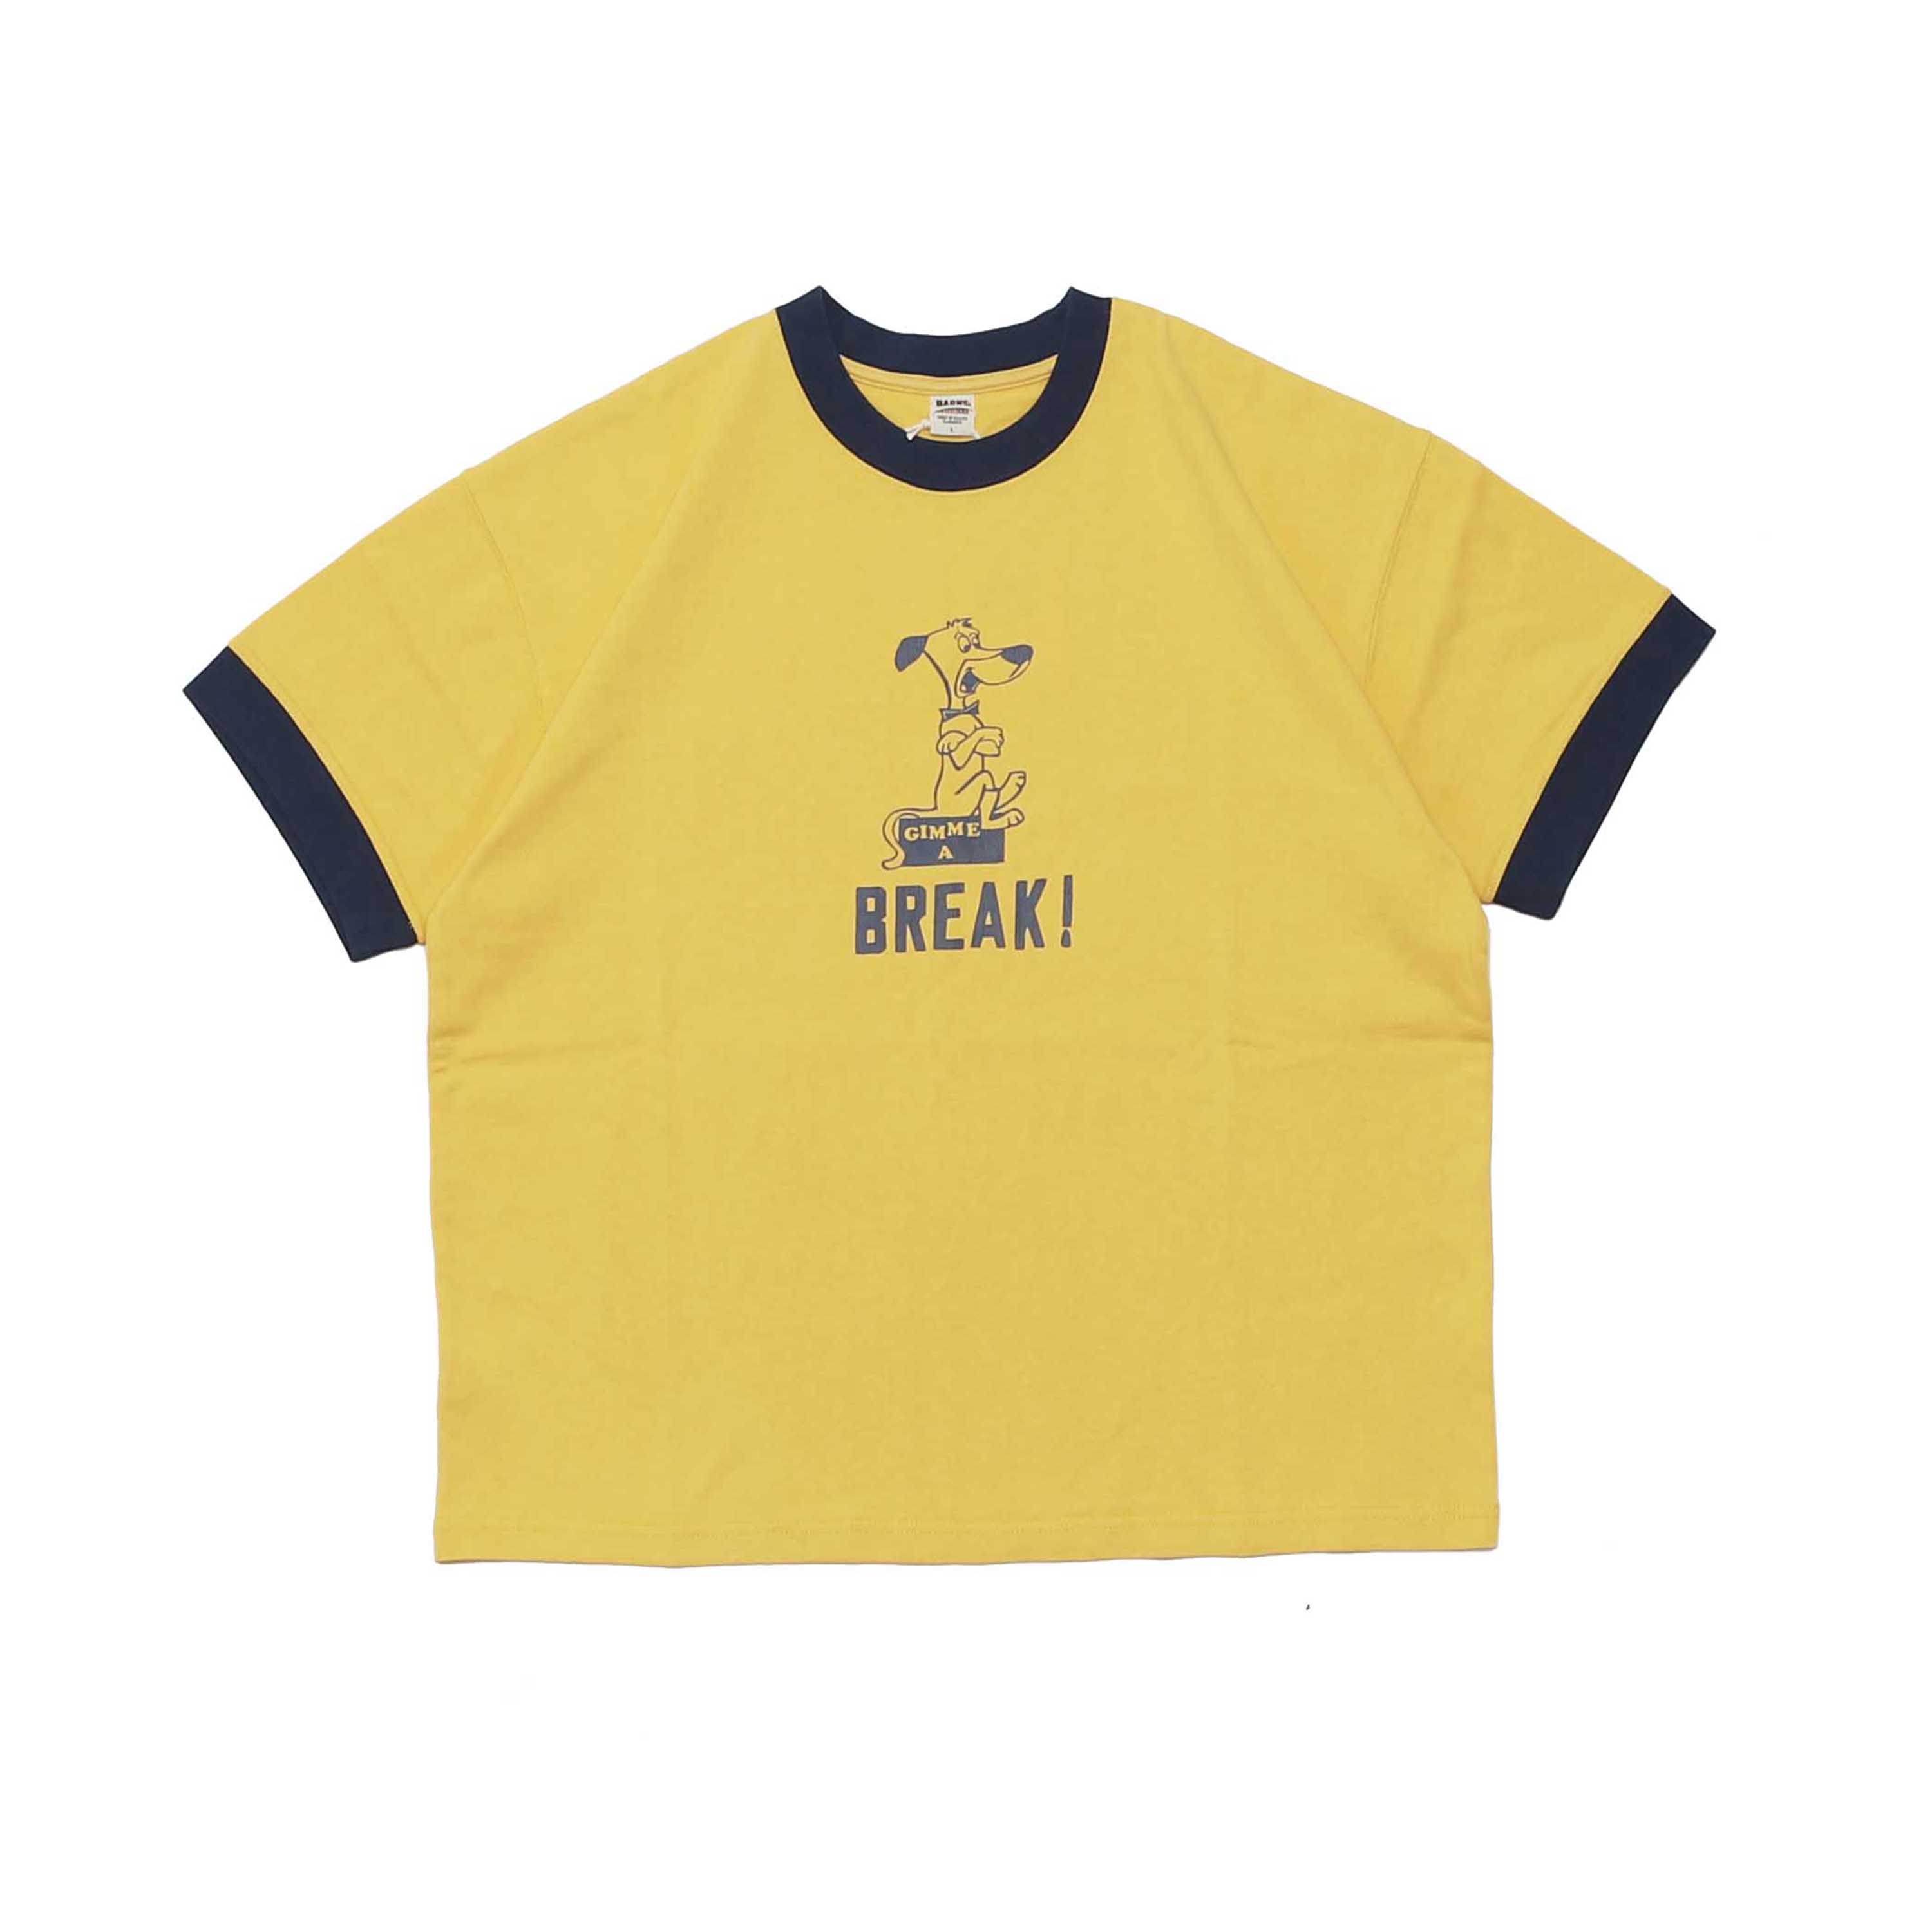 RELAXED FIT RINGER PRINTED S/S TEE - BREAK YELLOW(BR-24210)